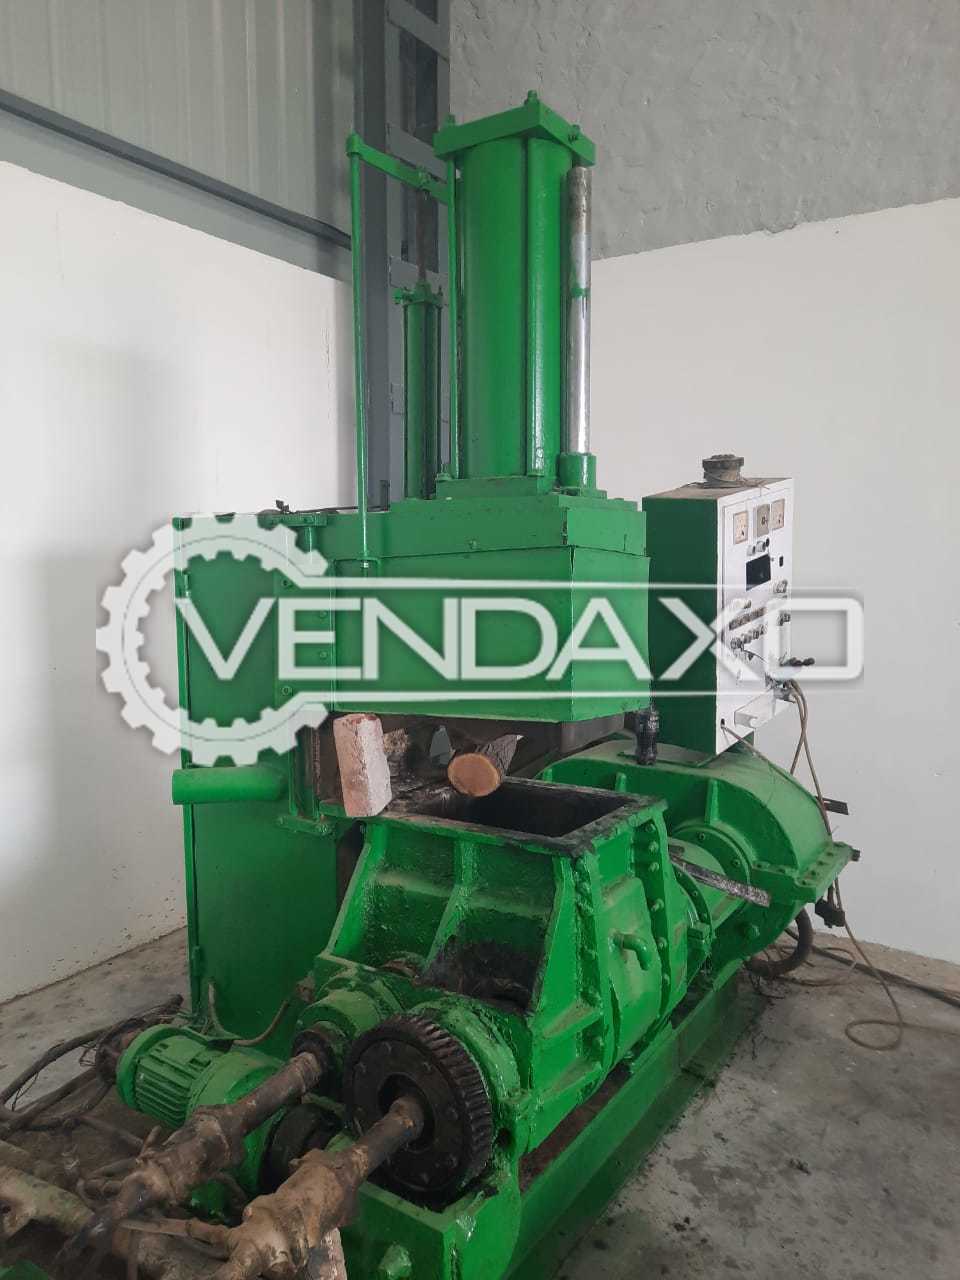 For Sale Used Rubber Kneader Machine - 25 Liter